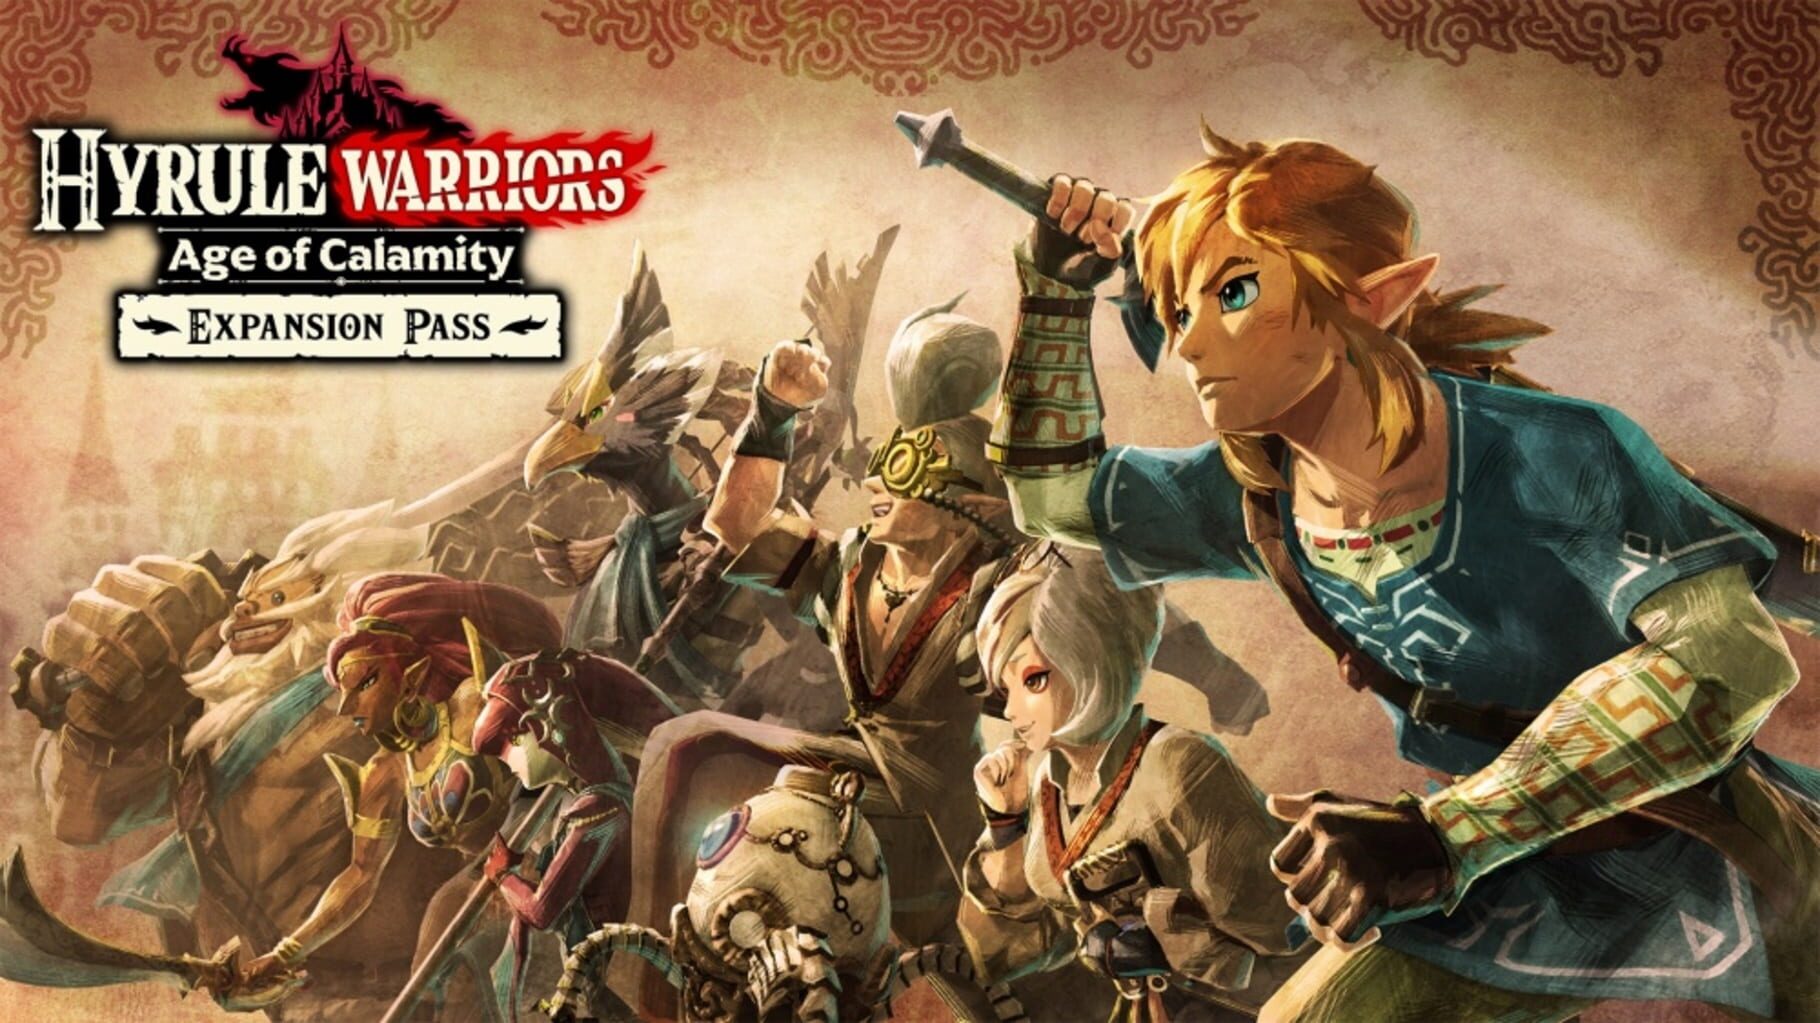 Arte - Hyrule Warriors: Age of Calamity - Expansion Pass